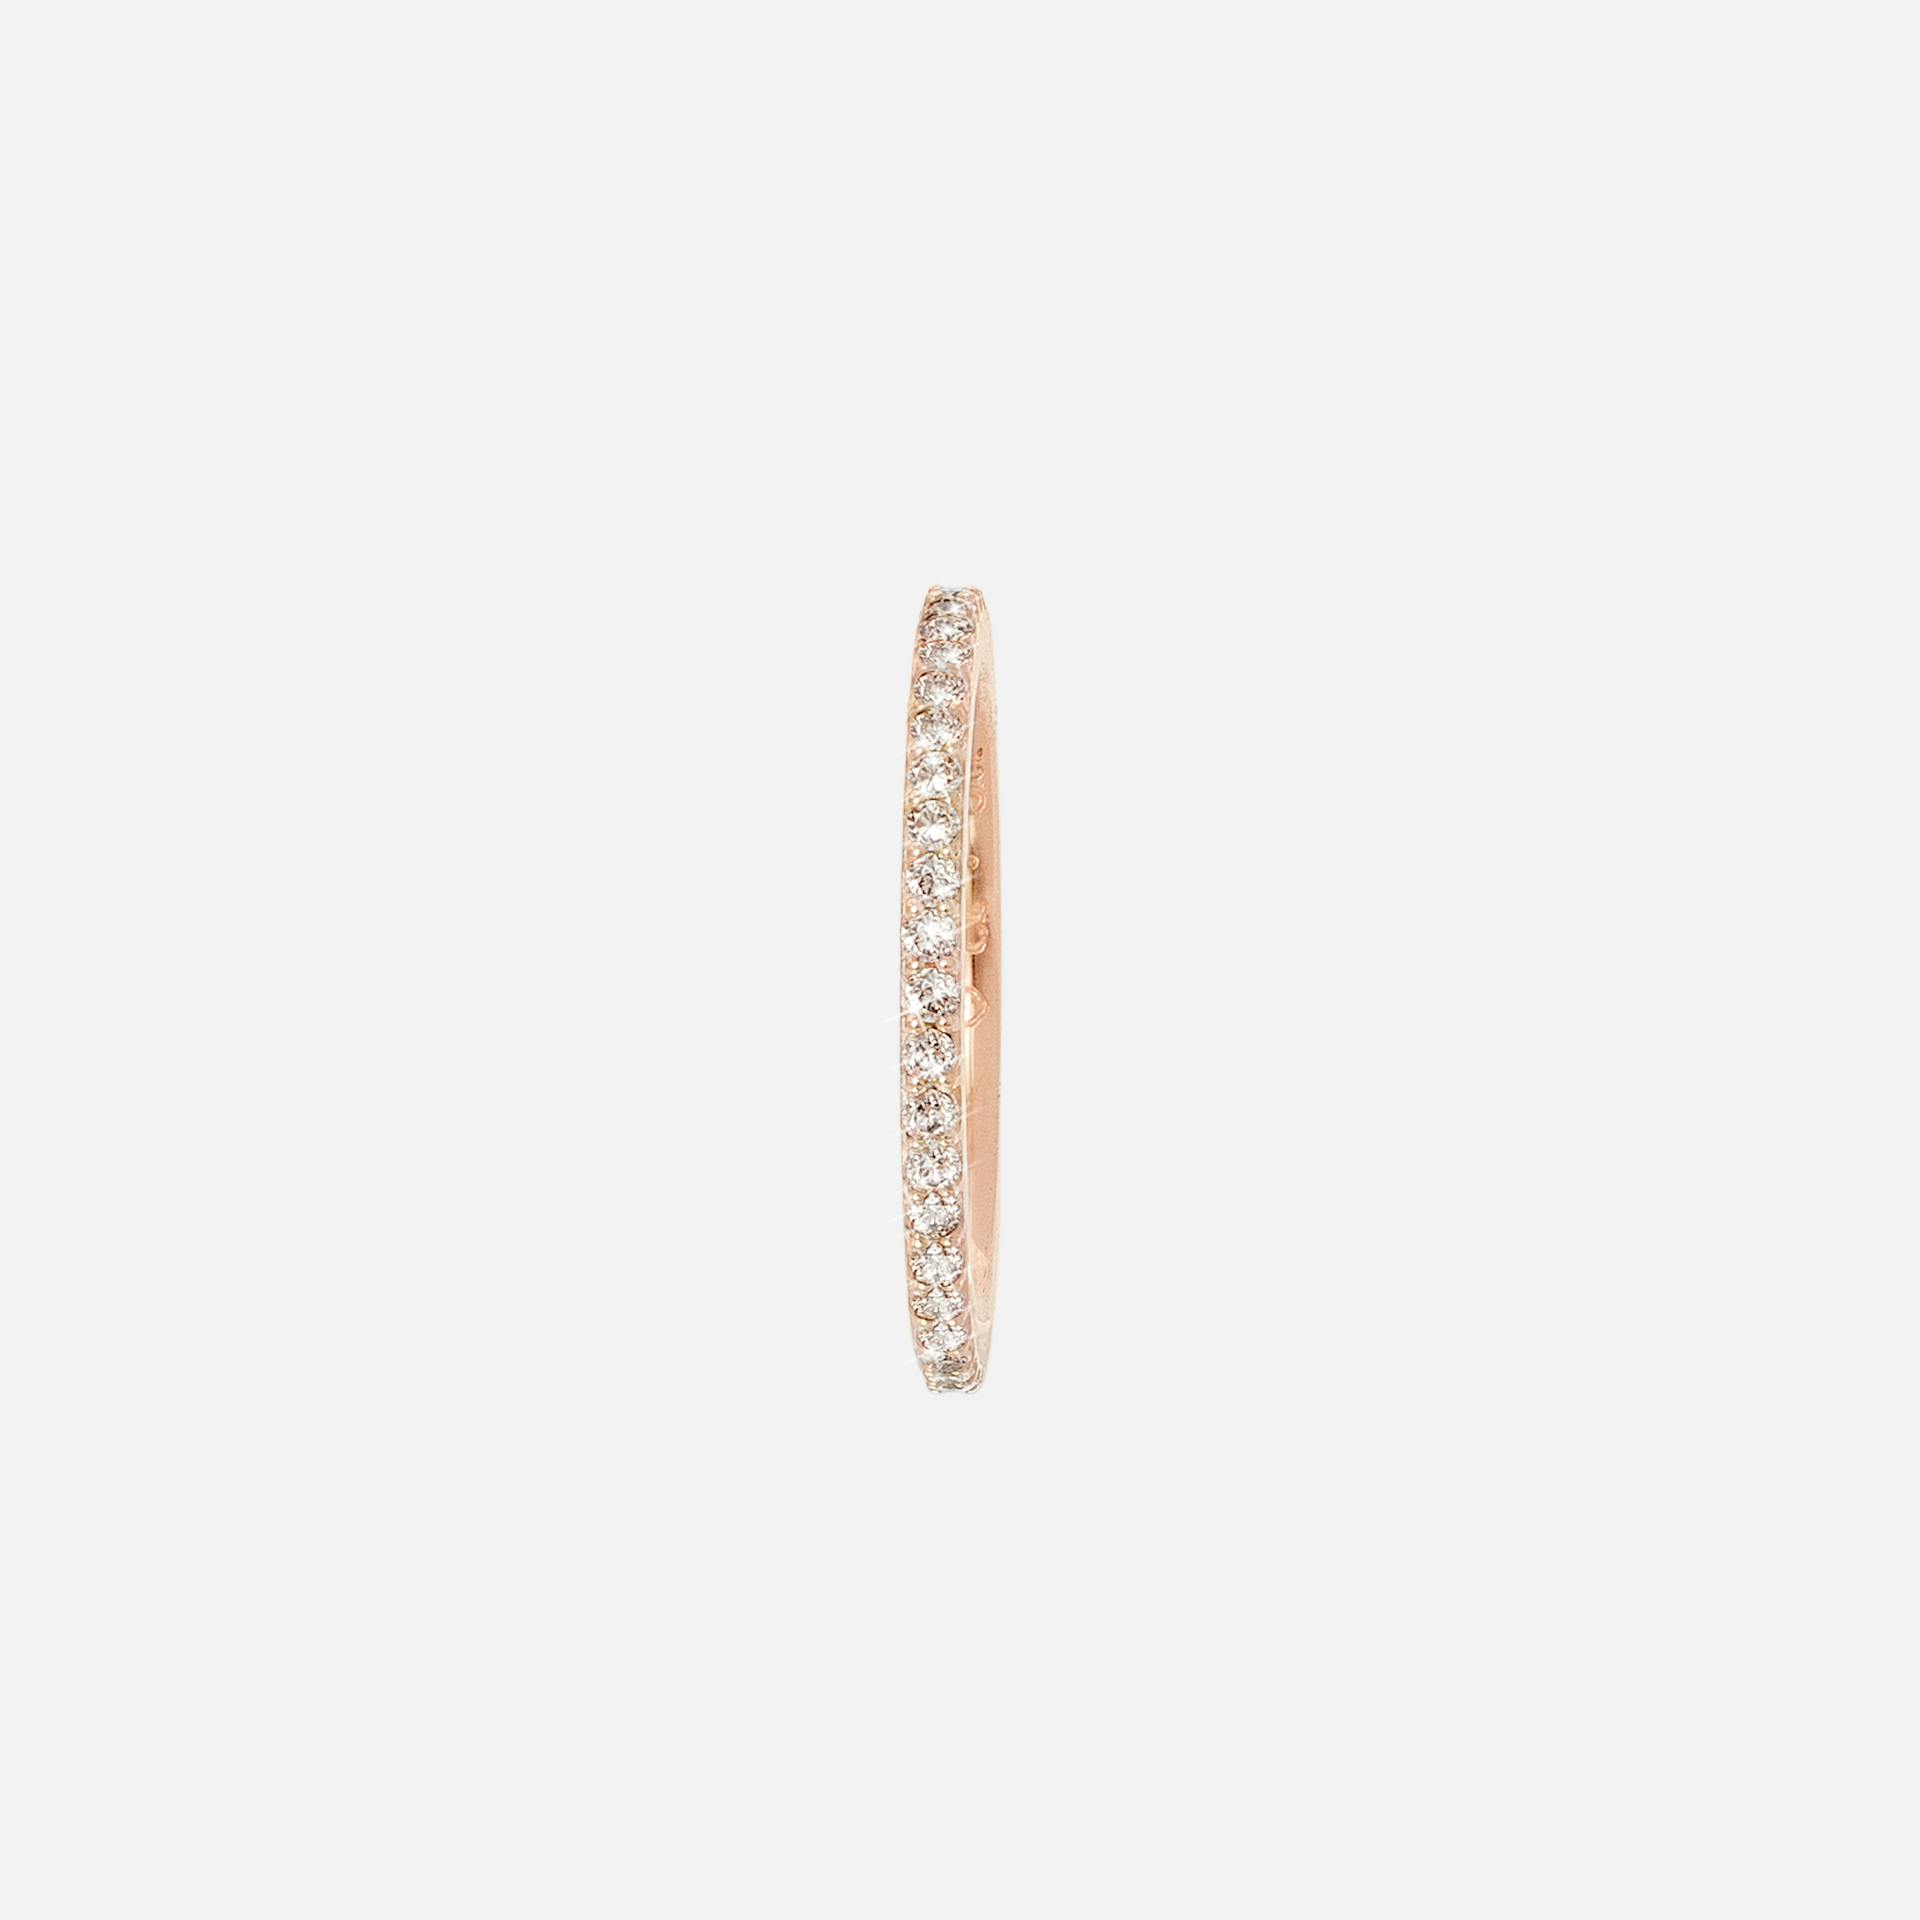 Love Bands Ring in Rose Gold with Brown Diamonds  |  Ole Lynggaard Copenhagen 